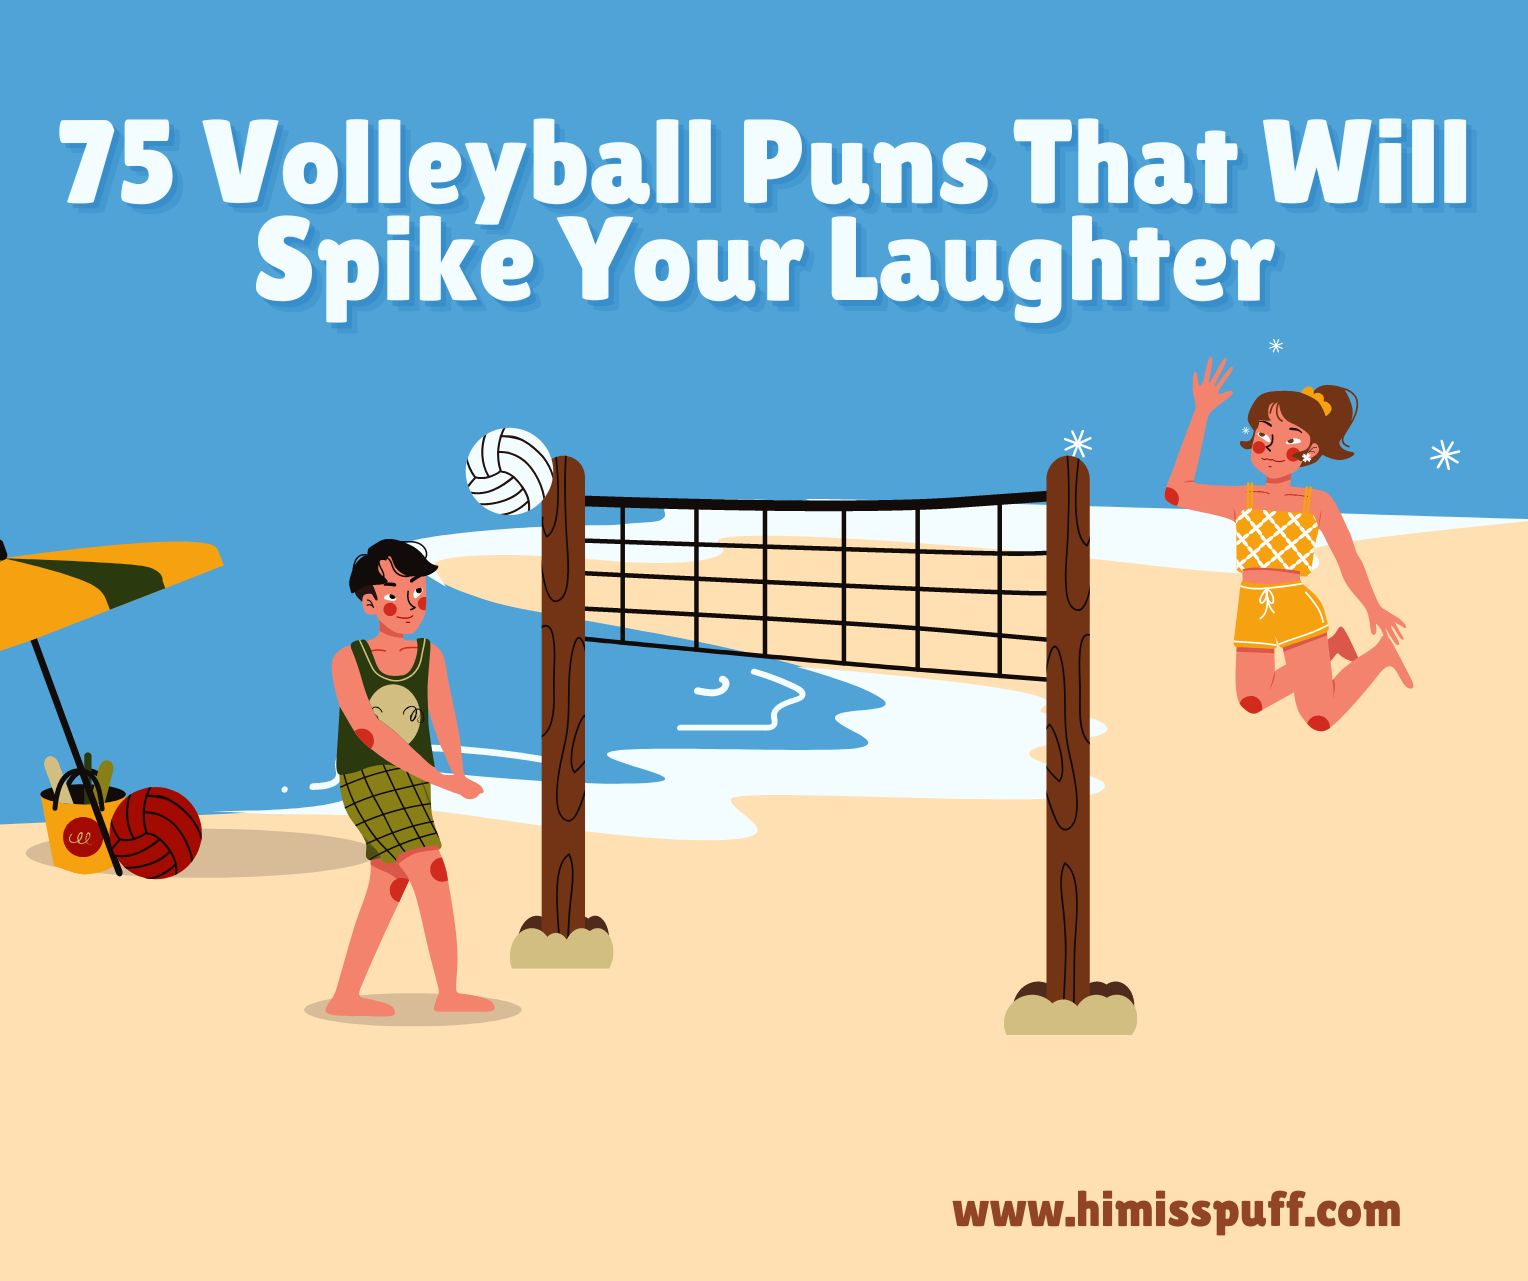 ️ 75 Volleyball Puns That Will Spike Your Laughter - HMP